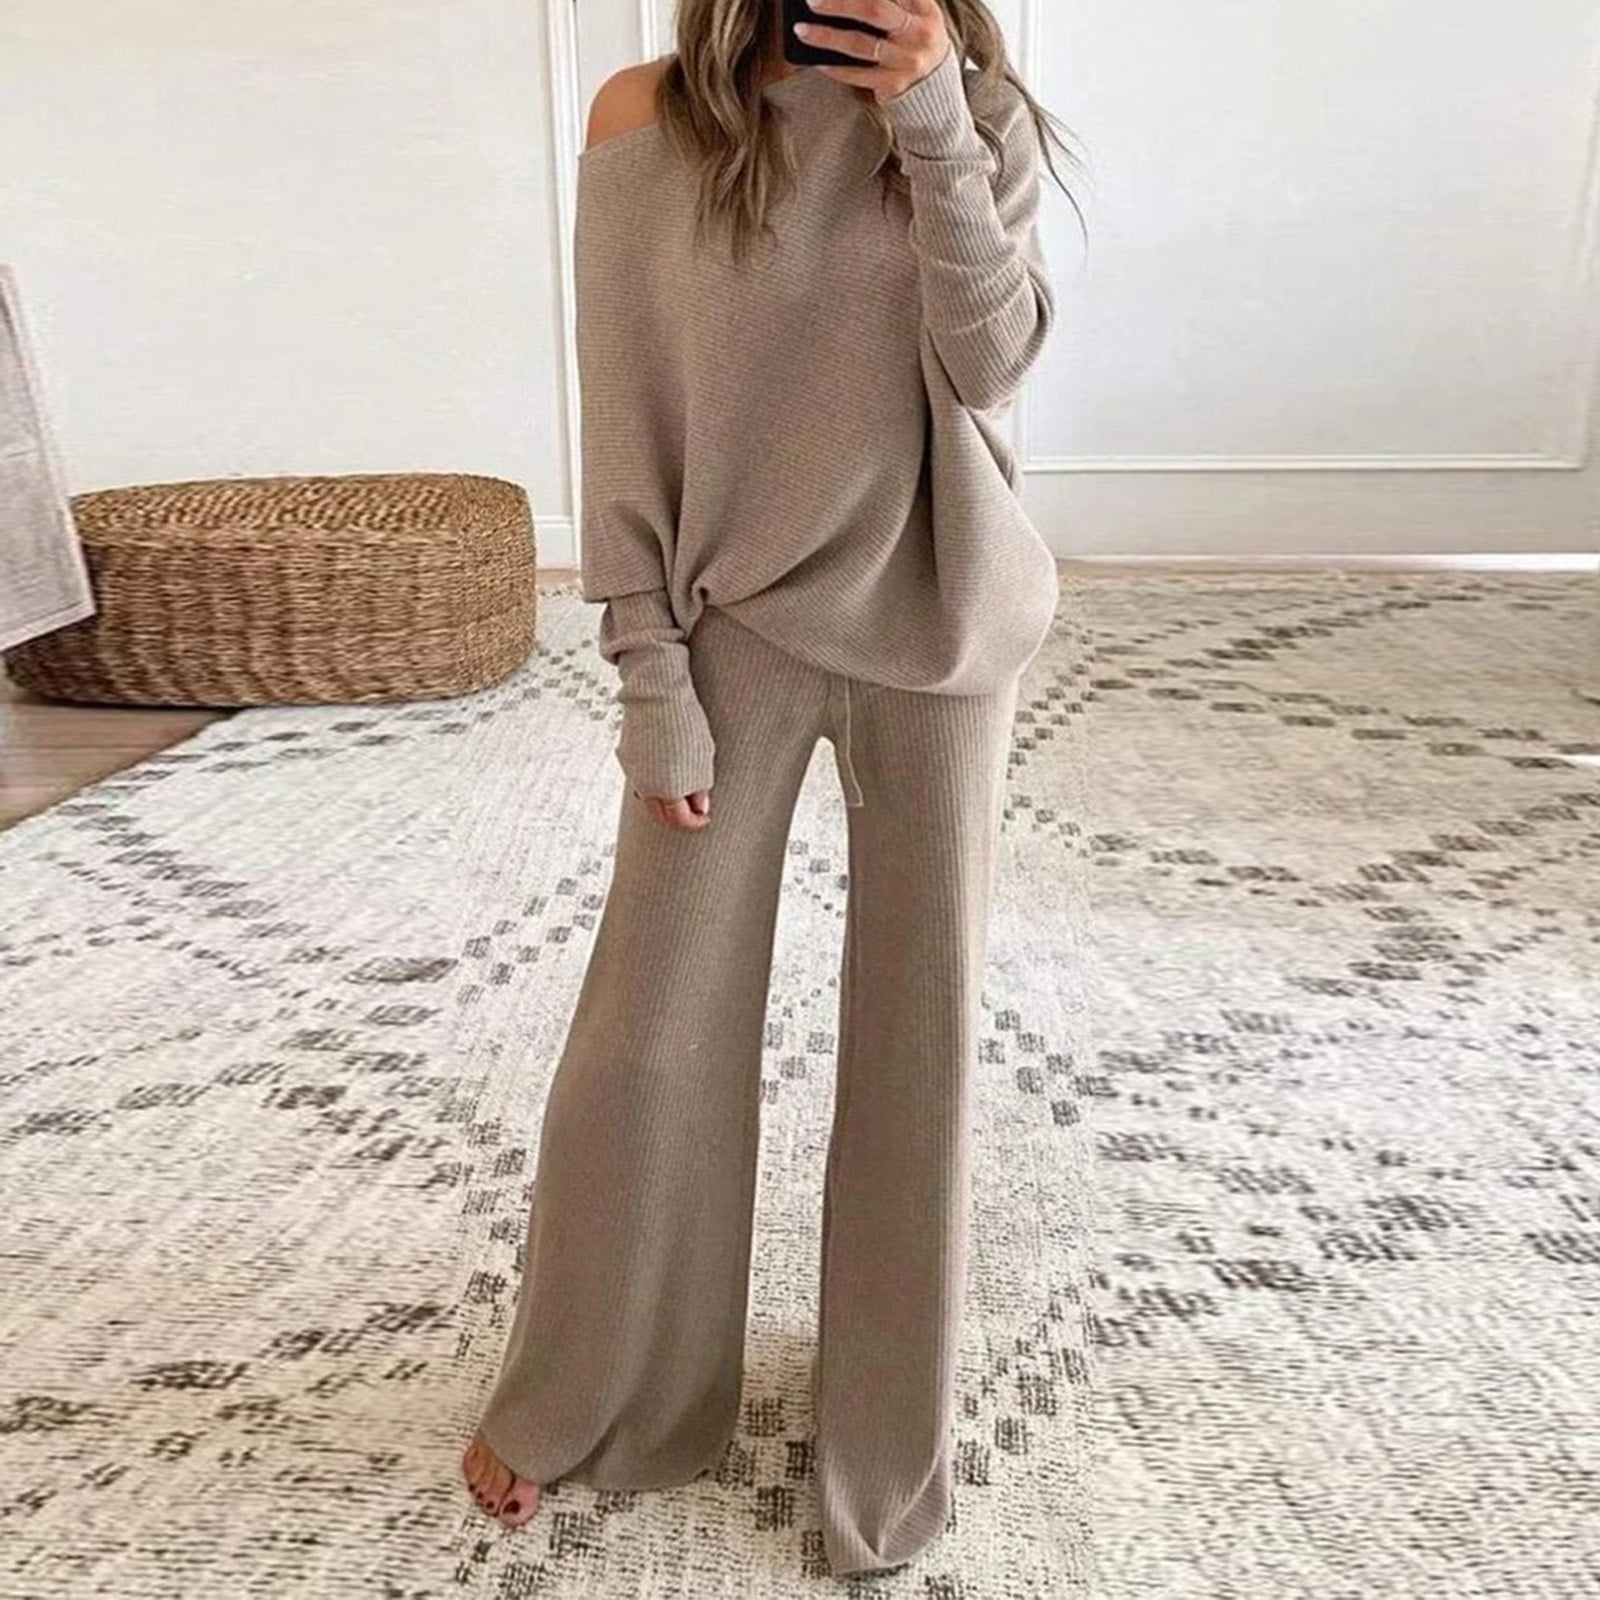 RYDCOT Lounge Sets for Women Petite 2 Piece Long Pants Knit Sweater Sets  Long Sleeve Knit Top and Wide Leg Pants Winter Outfits for Women Set Sale